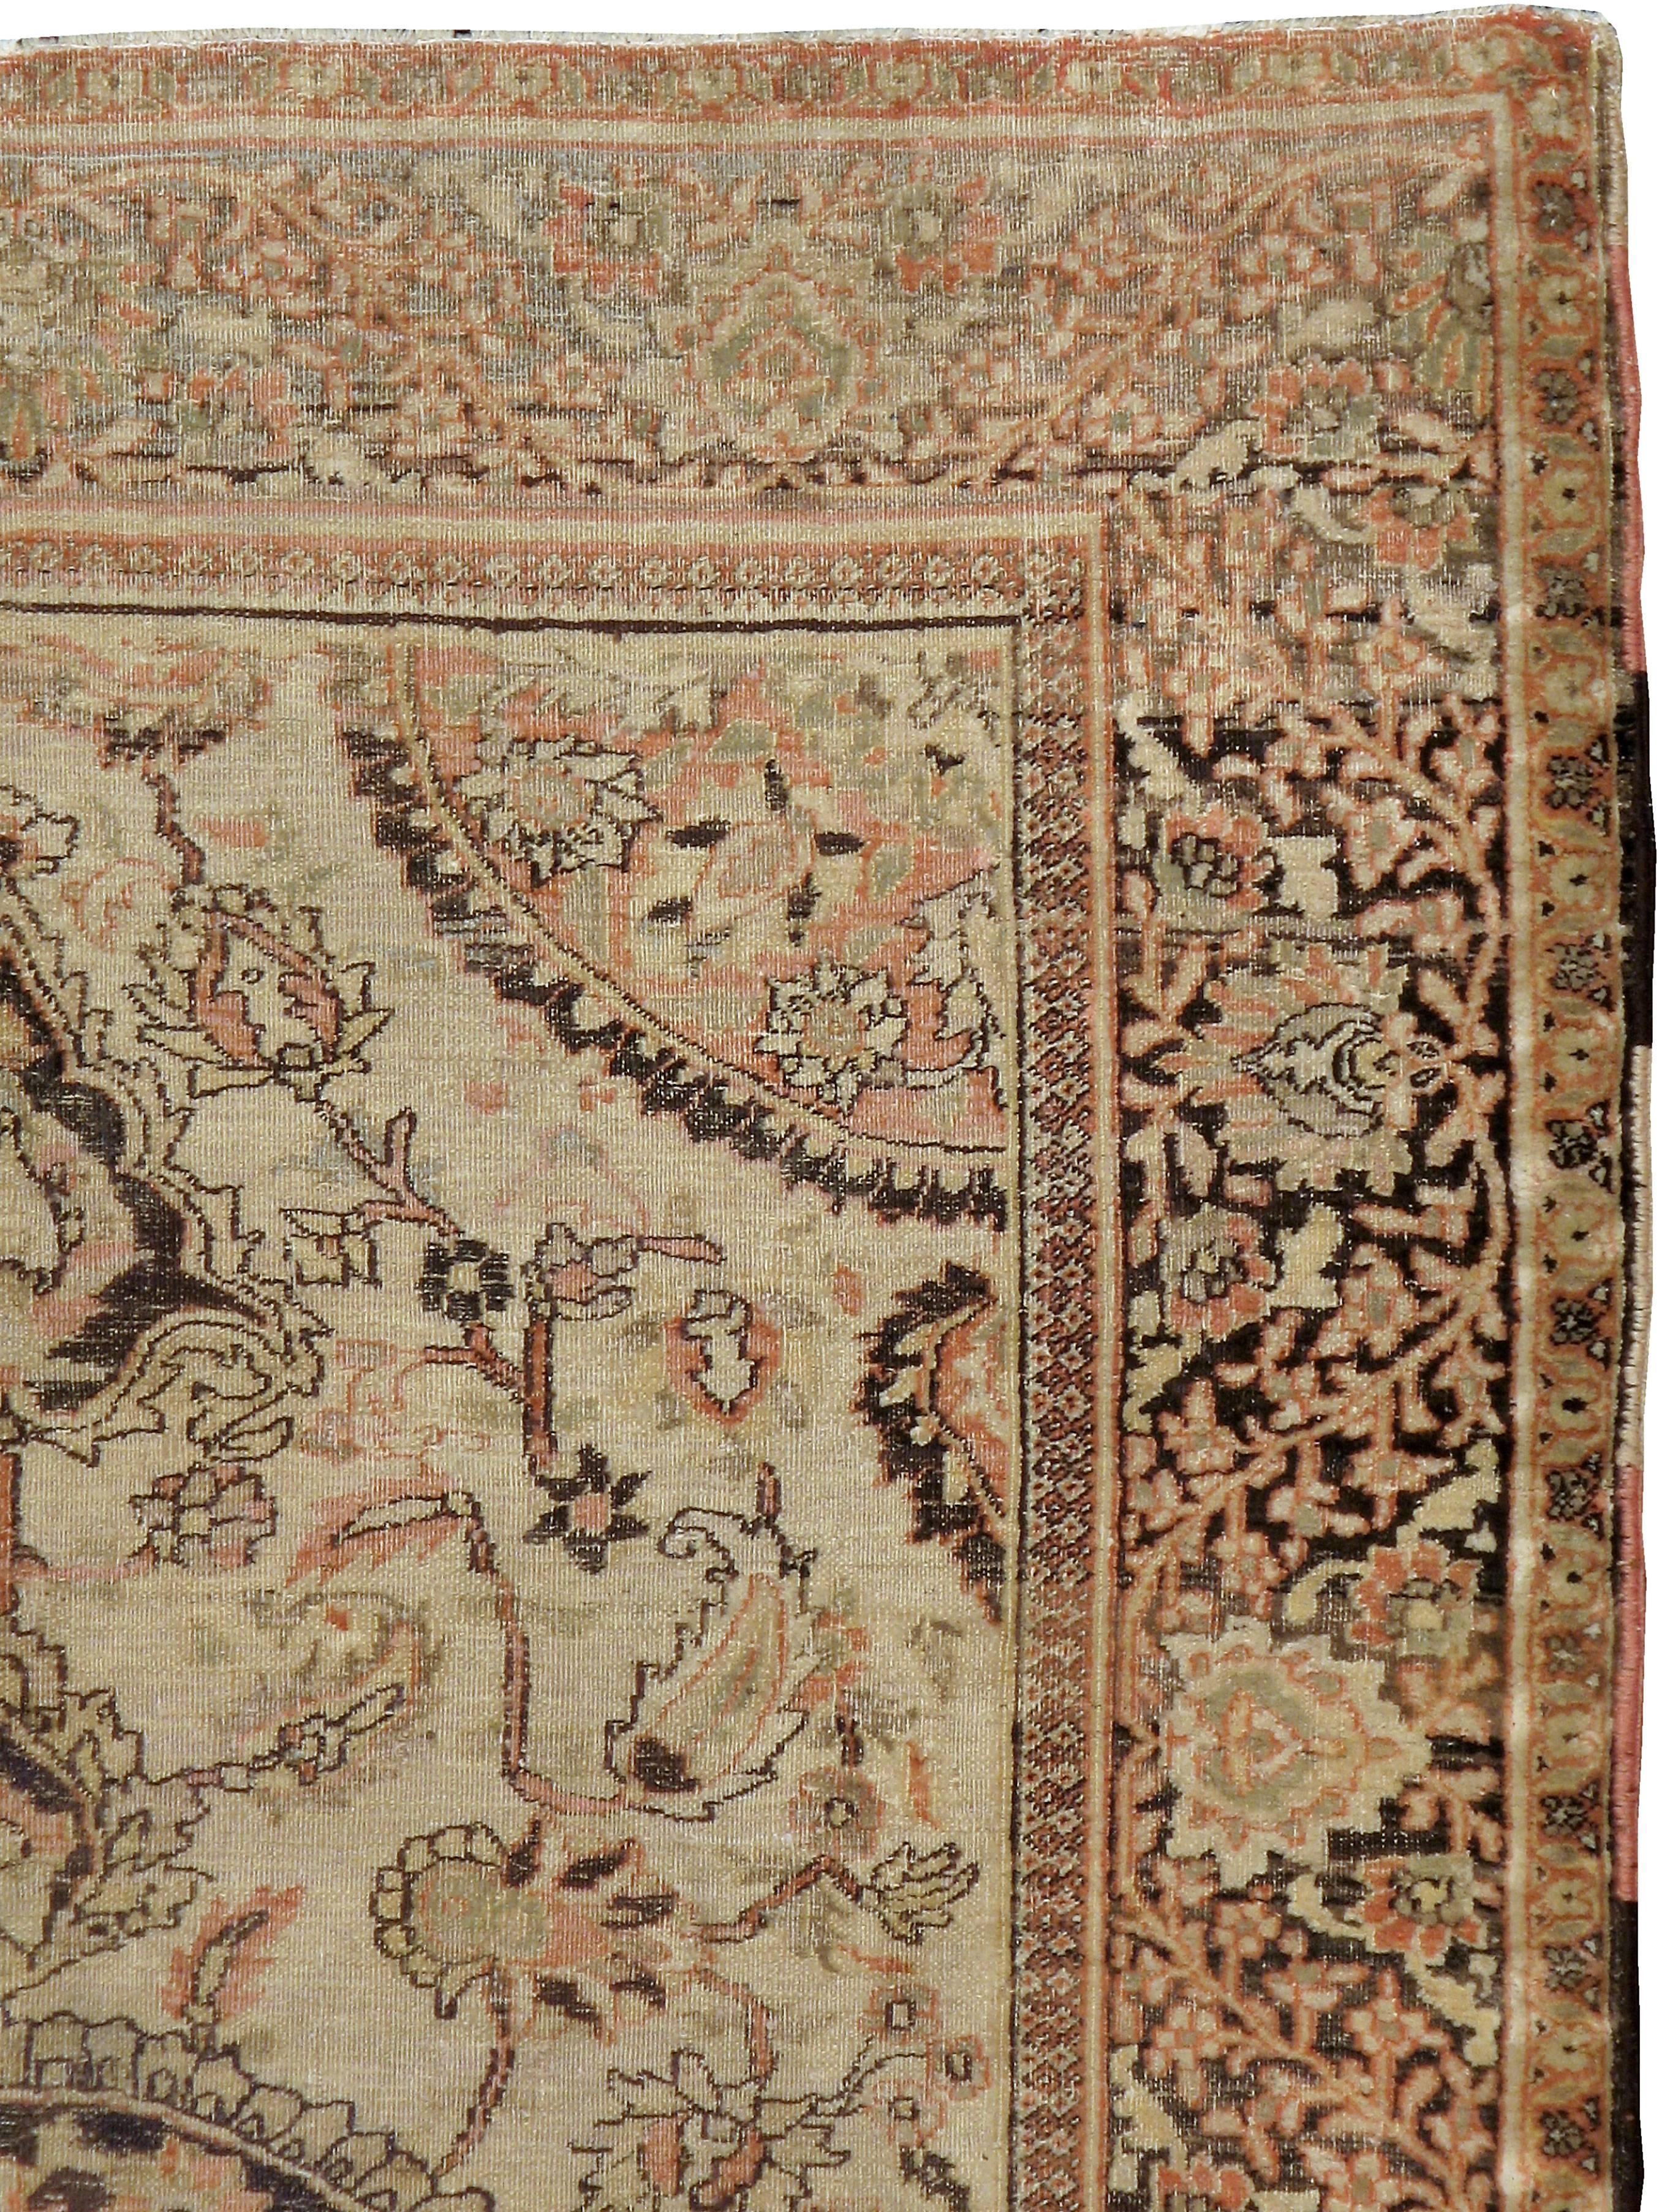 An antique Persian Dorokhsh carpet from the first quarter of the 20th century.